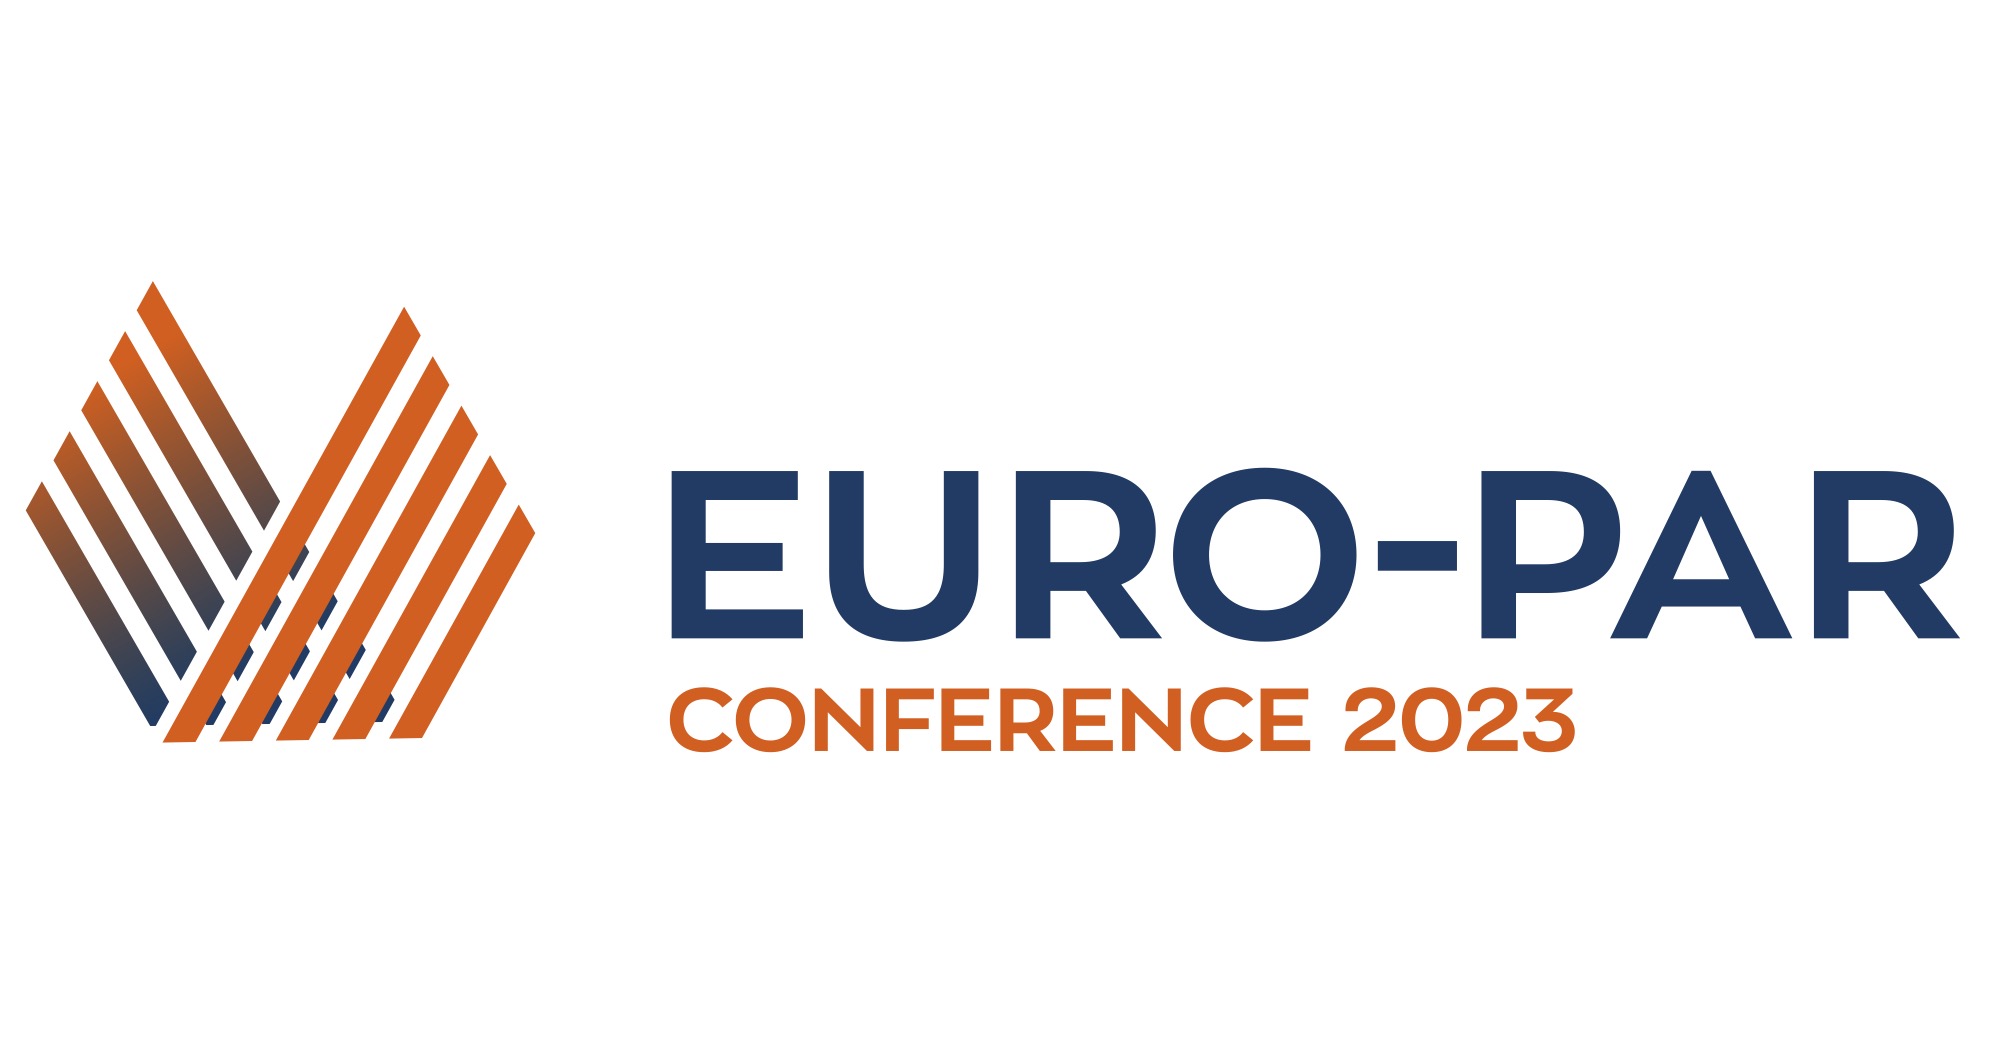 29th International European Conference on Parallel and Distributed Computing (Euro-Par 2023): Call for Workshops and Minisymposia